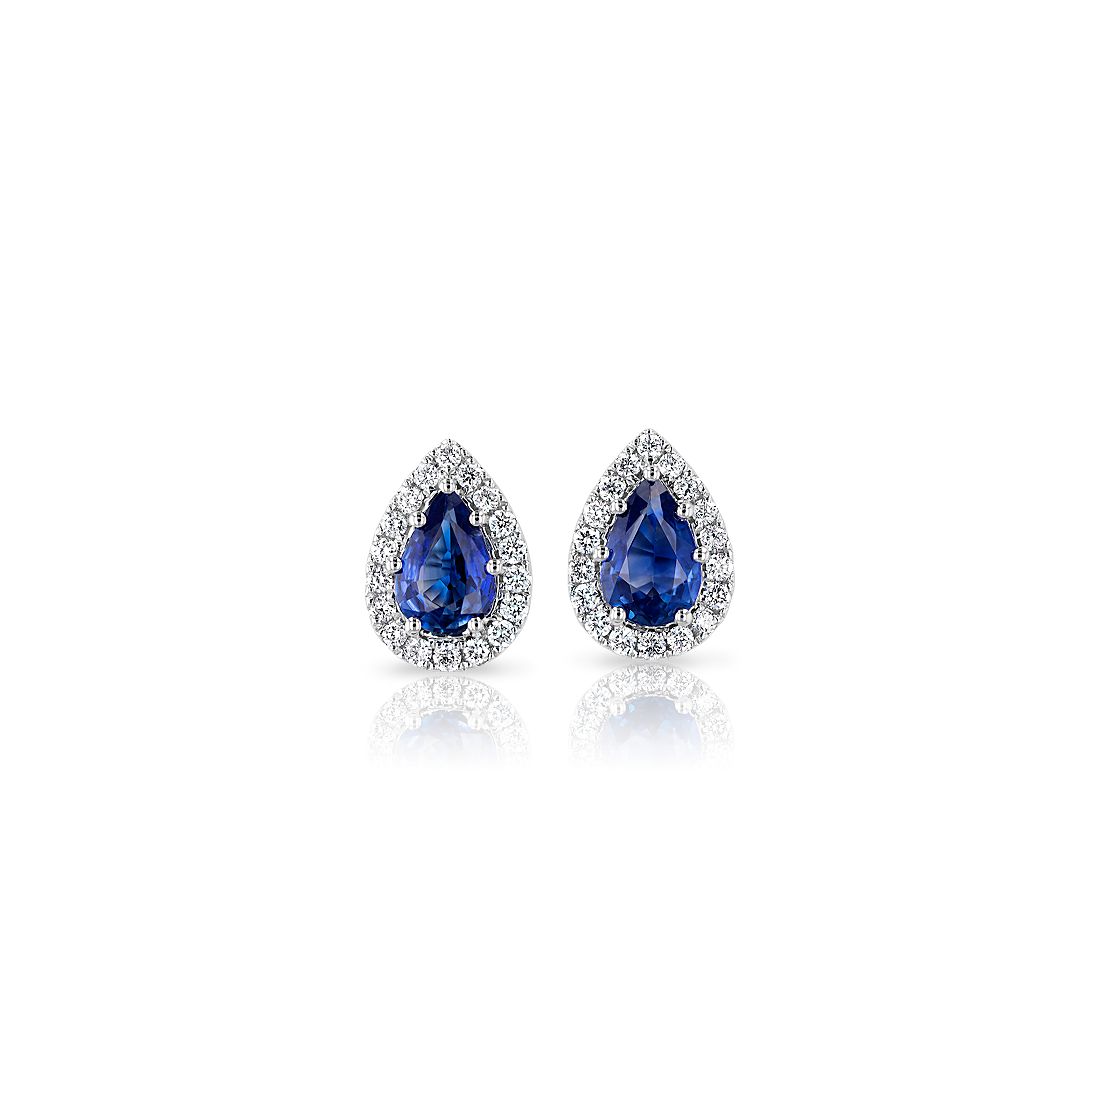 Pear-Shaped Sapphire Stud Earrings with Diamond Halo in 14k White Gold (5x4mm)